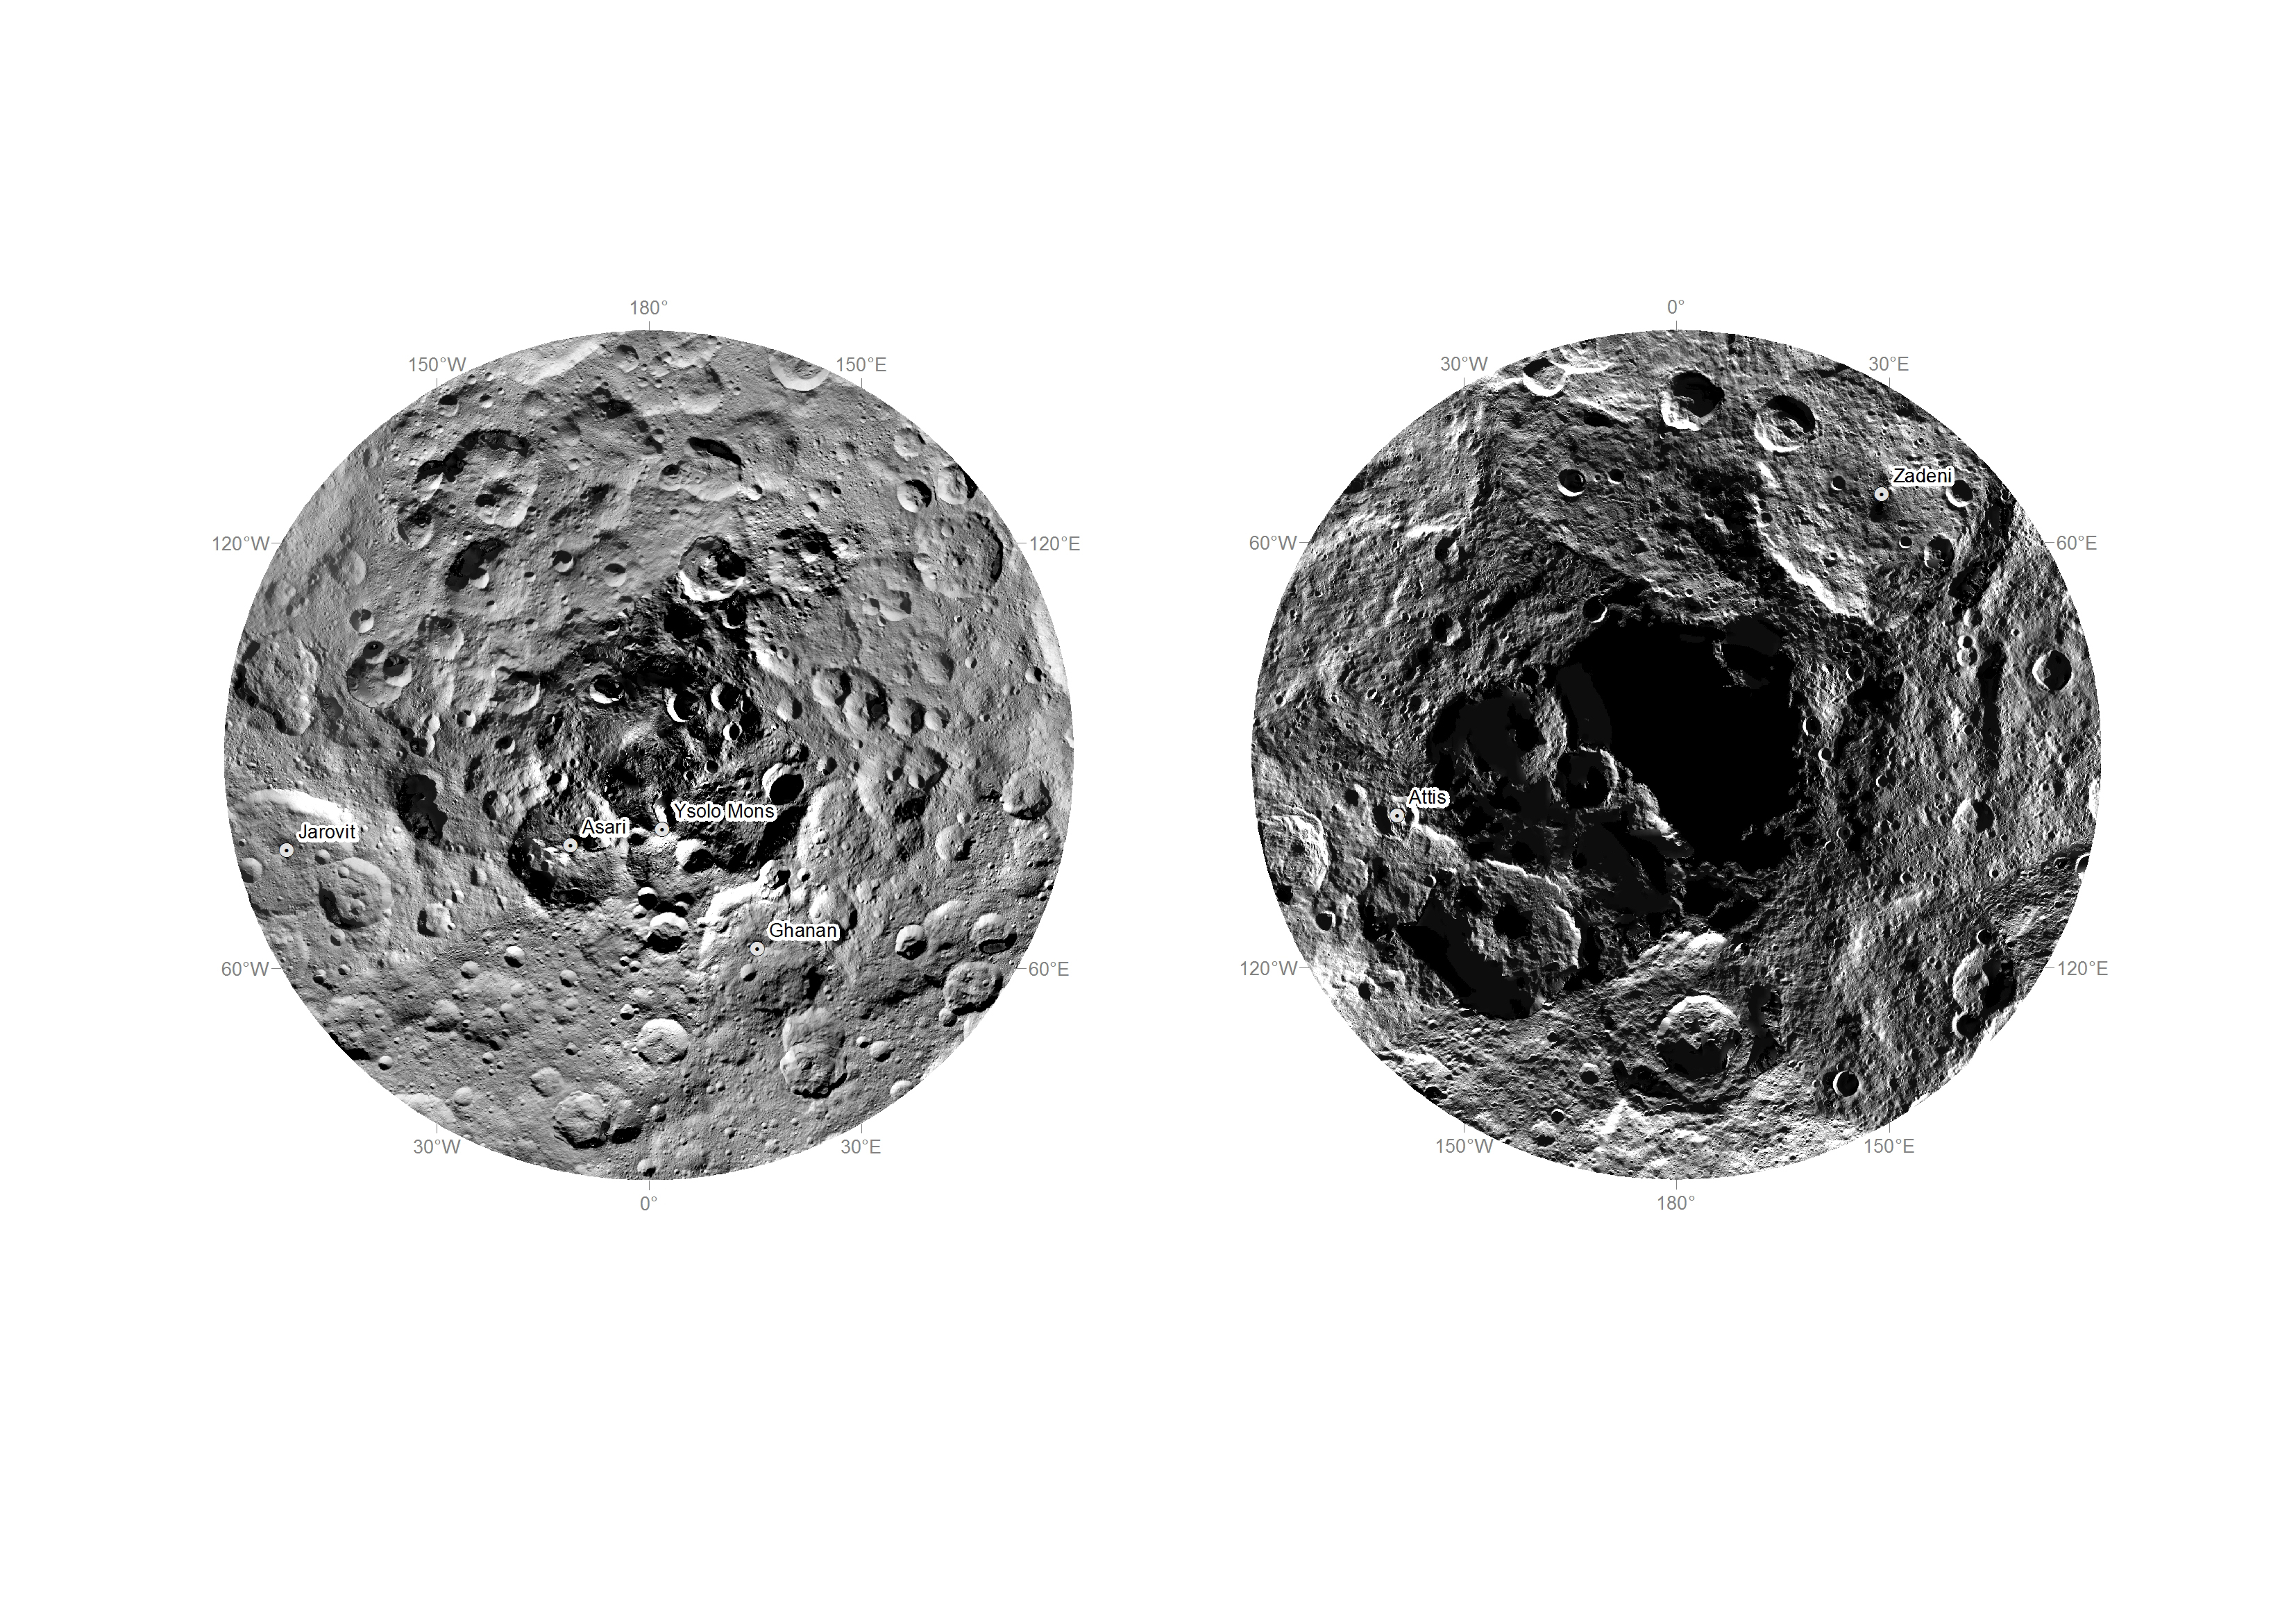 First Complete Look at Ceres' Poles